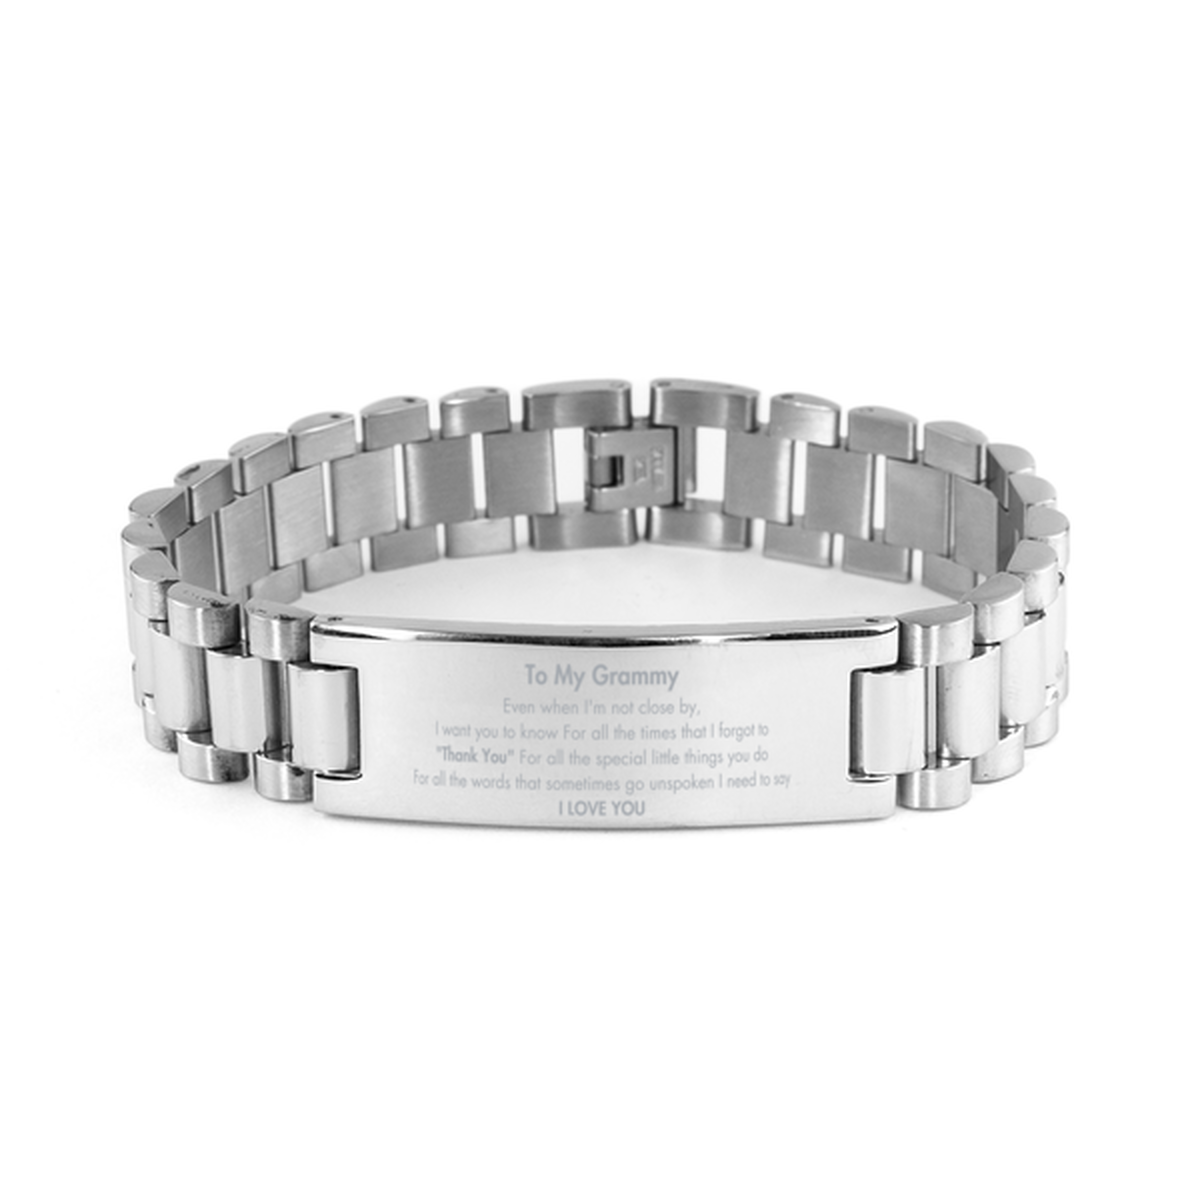 Thank You Gifts for Grammy, Keepsake Ladder Stainless Steel Bracelet Gifts for Grammy Birthday Mother's day Father's Day Grammy For all the words That sometimes go unspoken I need to say I LOVE YOU